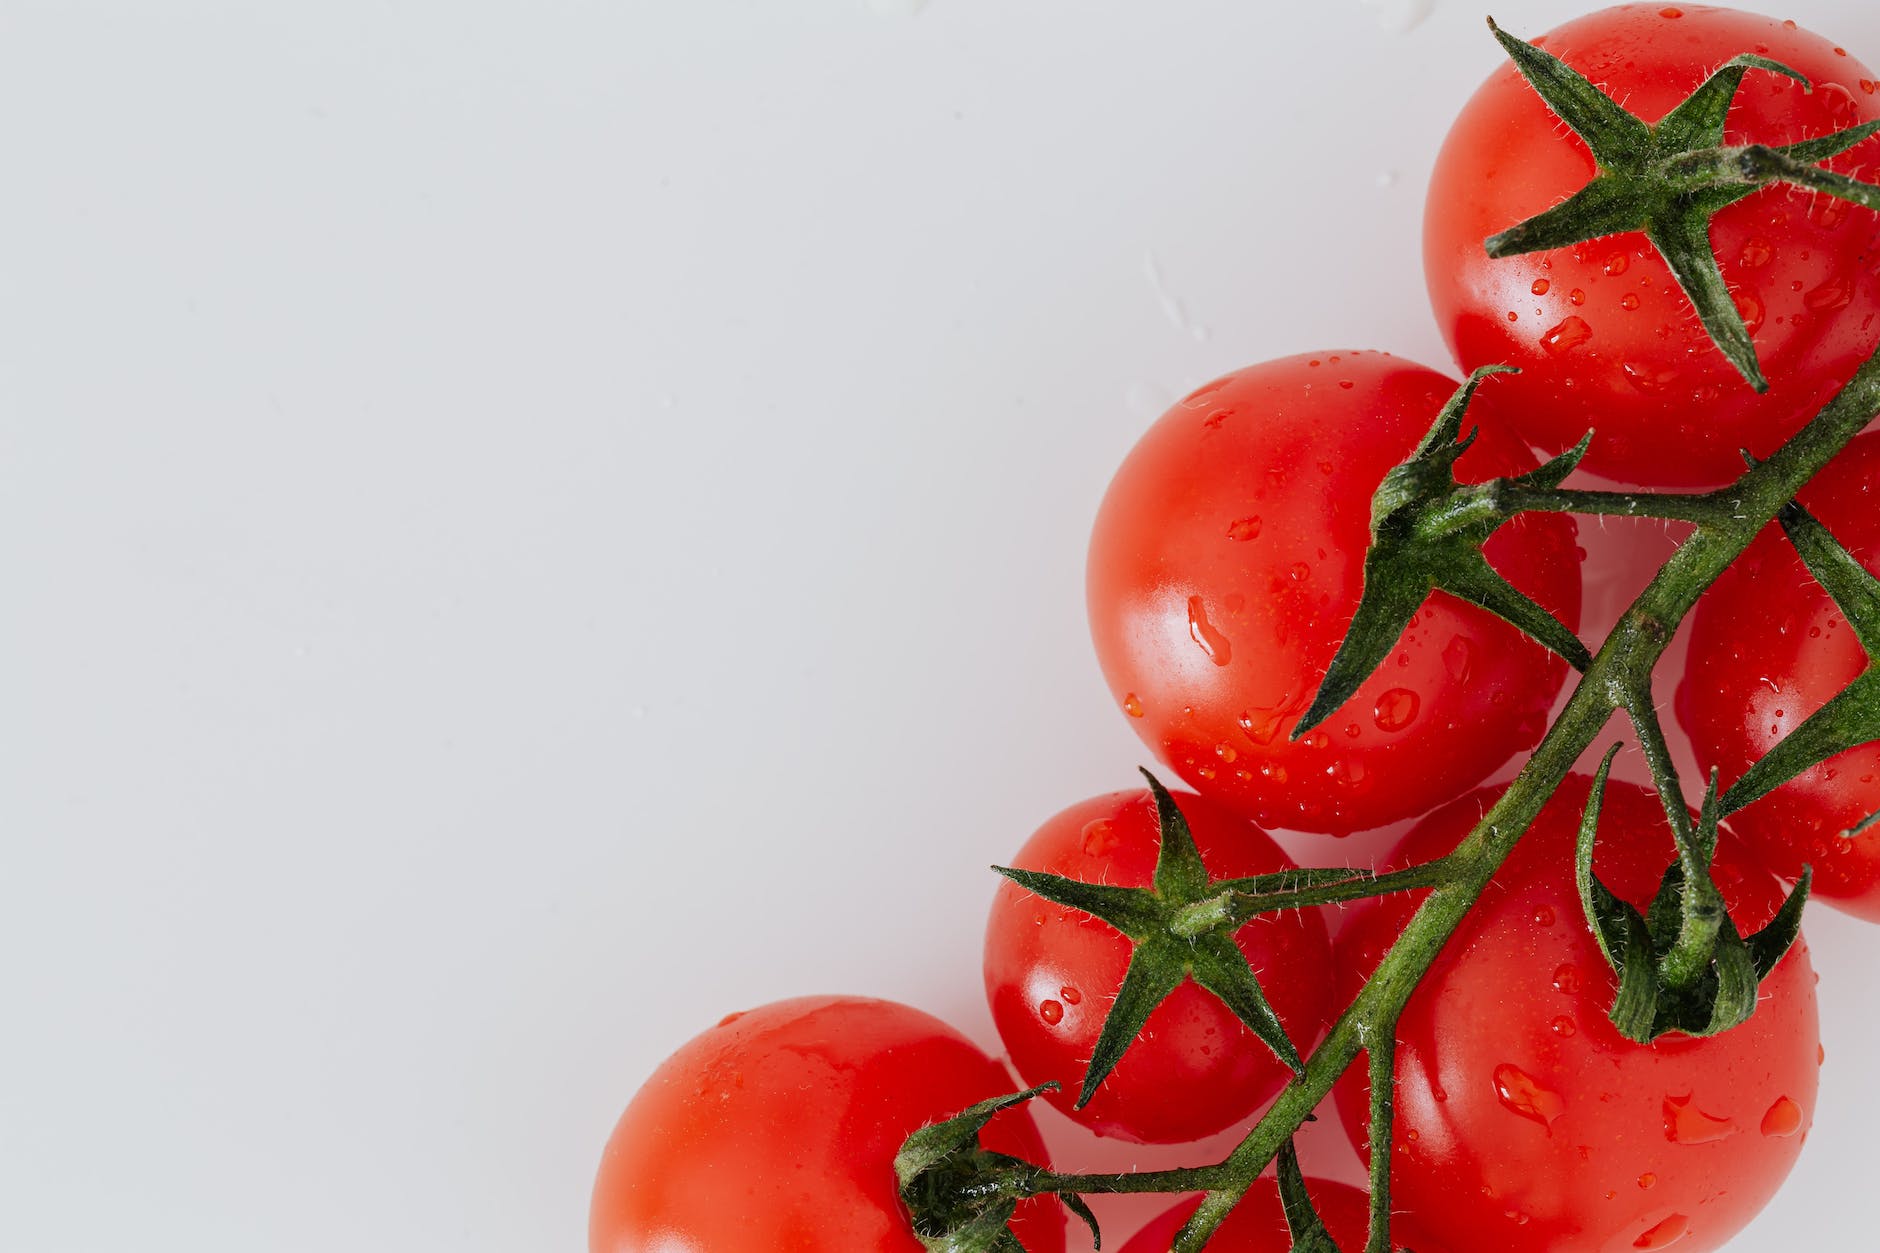 ripe red tomatoes on white surface